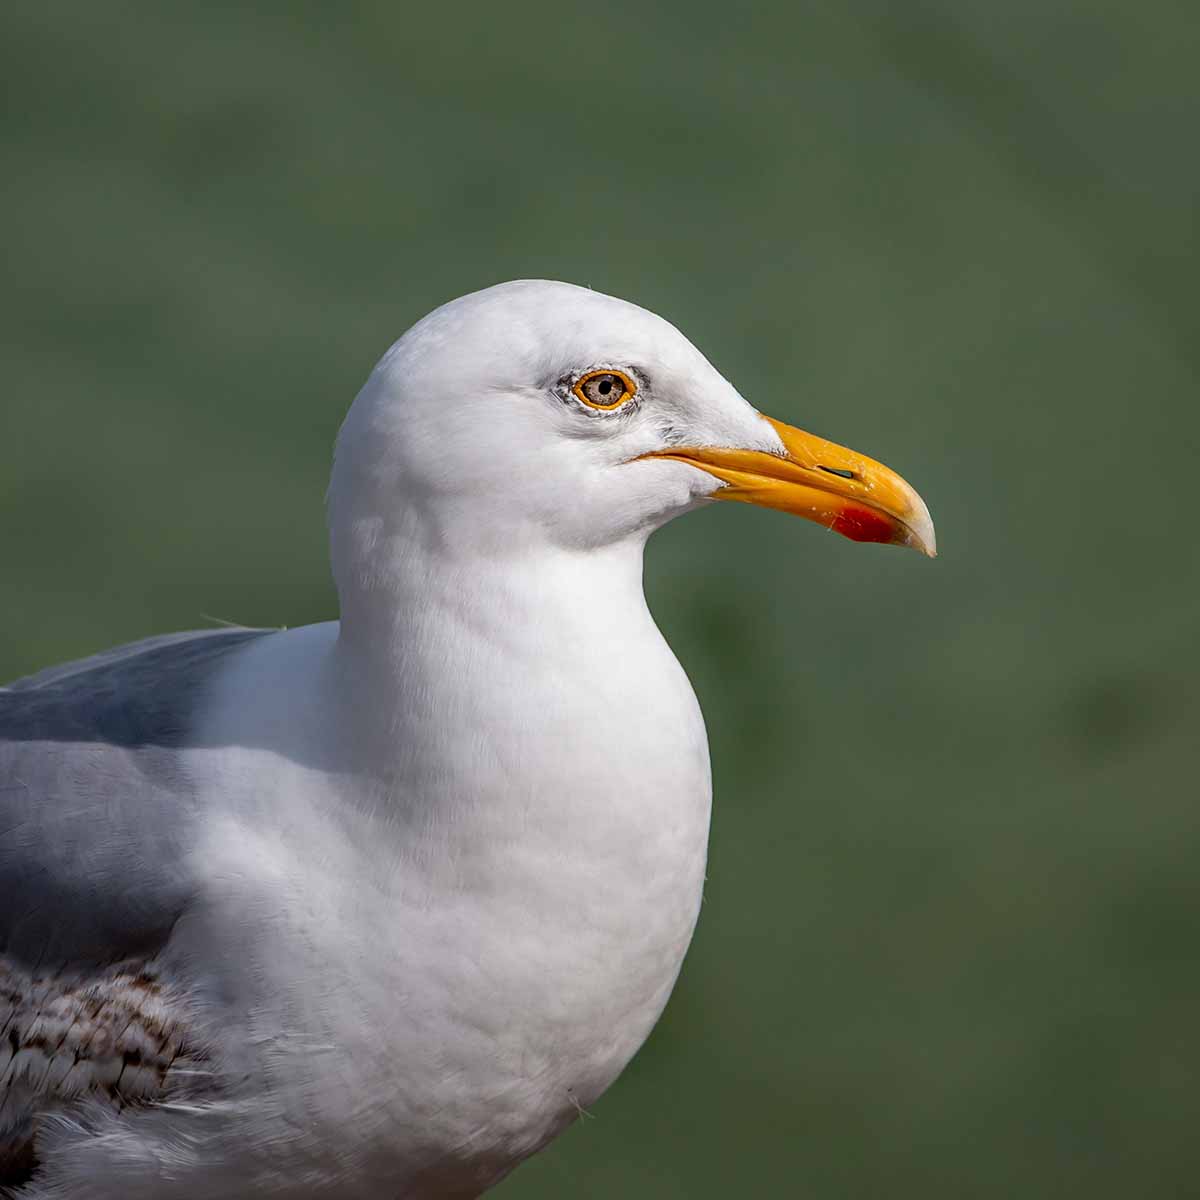 The image shows a herring gull in profile, with its distinctive large, hooked beak and robust body clearly visible. The gull is perched on an unknown structure, with greenish-blue ocean water visible in the out-of-focus background. The bird's plumage is a mix of (mostly) white, gray, and black feathers towards it's wing tips, characteristic of an adult herring gull. The profile angle highlights the gull's strong, angular features and provides a detailed view of its appearance. Herring gulls are known for their adaptability, opportunistic foraging, and prevalence in coastal environments, as described in the search results. Make sure you don't have any bright cars parked near them or you'll have another trip to the carwash in your future.